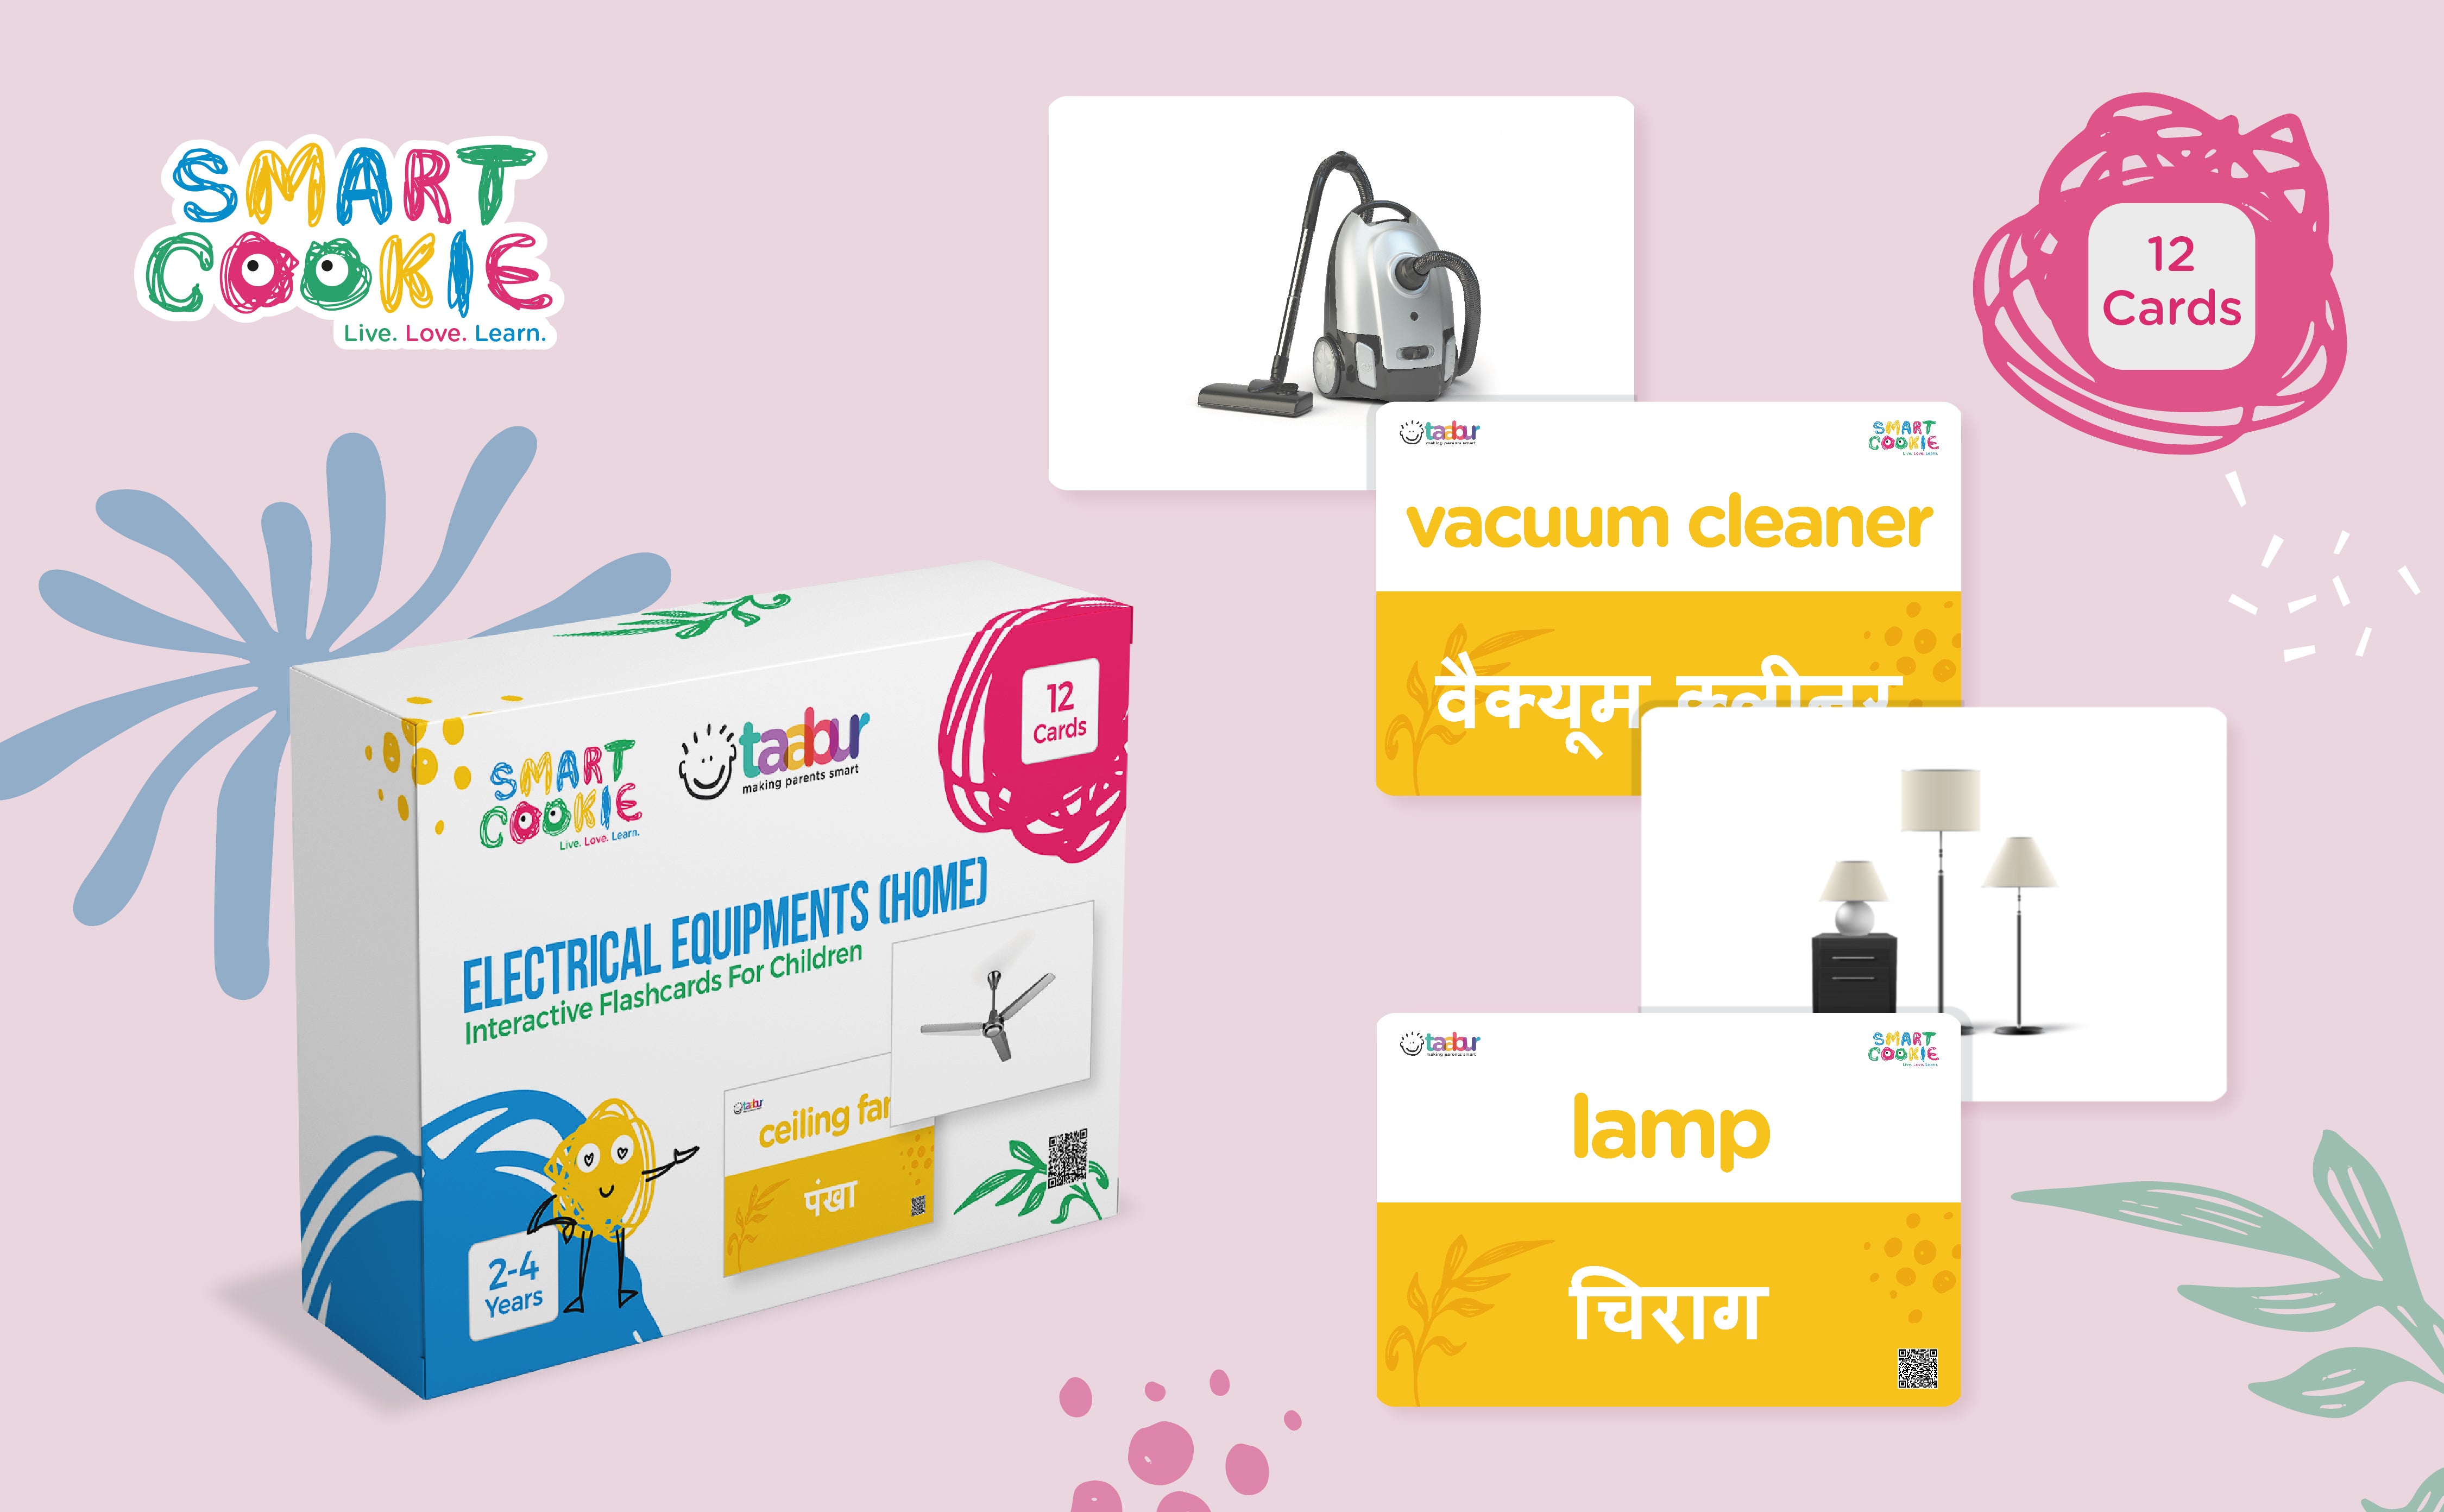 Electrical Equipment (Home) - Interactive Flash Cards for Children (12 Cards) - for Kids Aged 2 to 4 Years Old